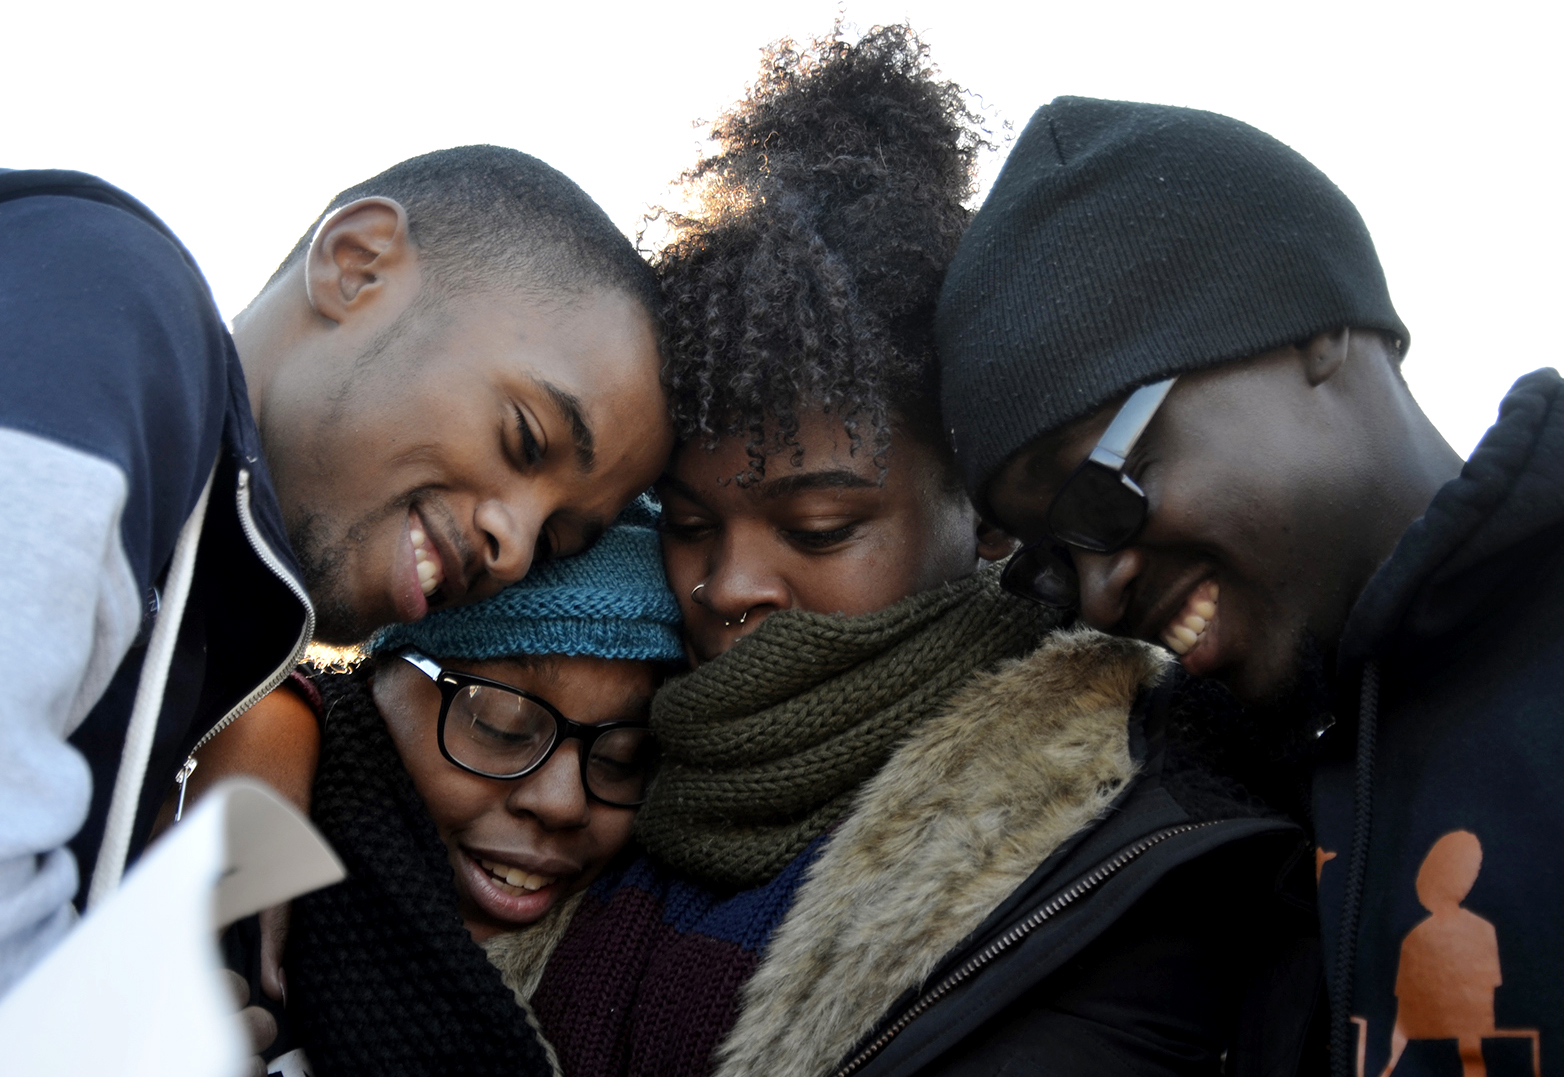 Members of Concerned Student 1950 embrace after the announcement that University of Missouri System President Tim Wolfe would resign Nov. 9, 2015, in Columbia, Mo. (Halee Rock—The Missourian/AP)